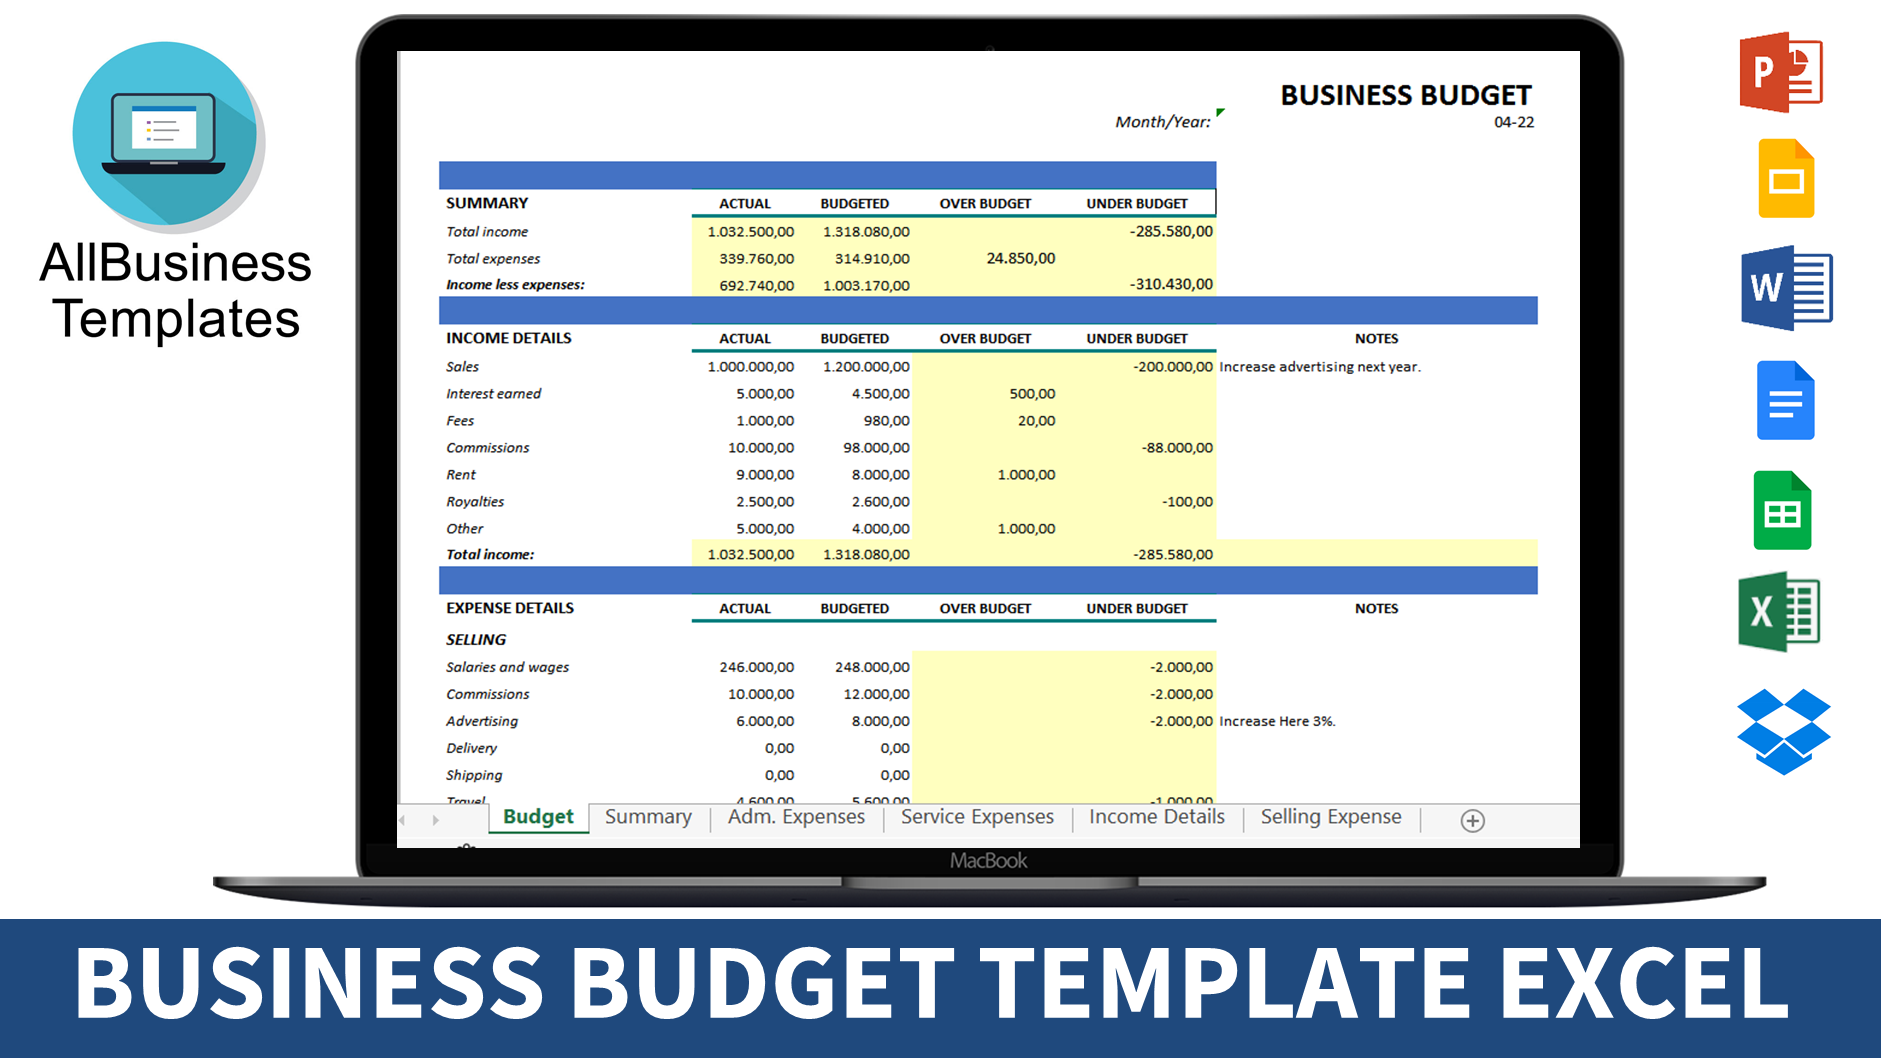 Business Budget Excel main image